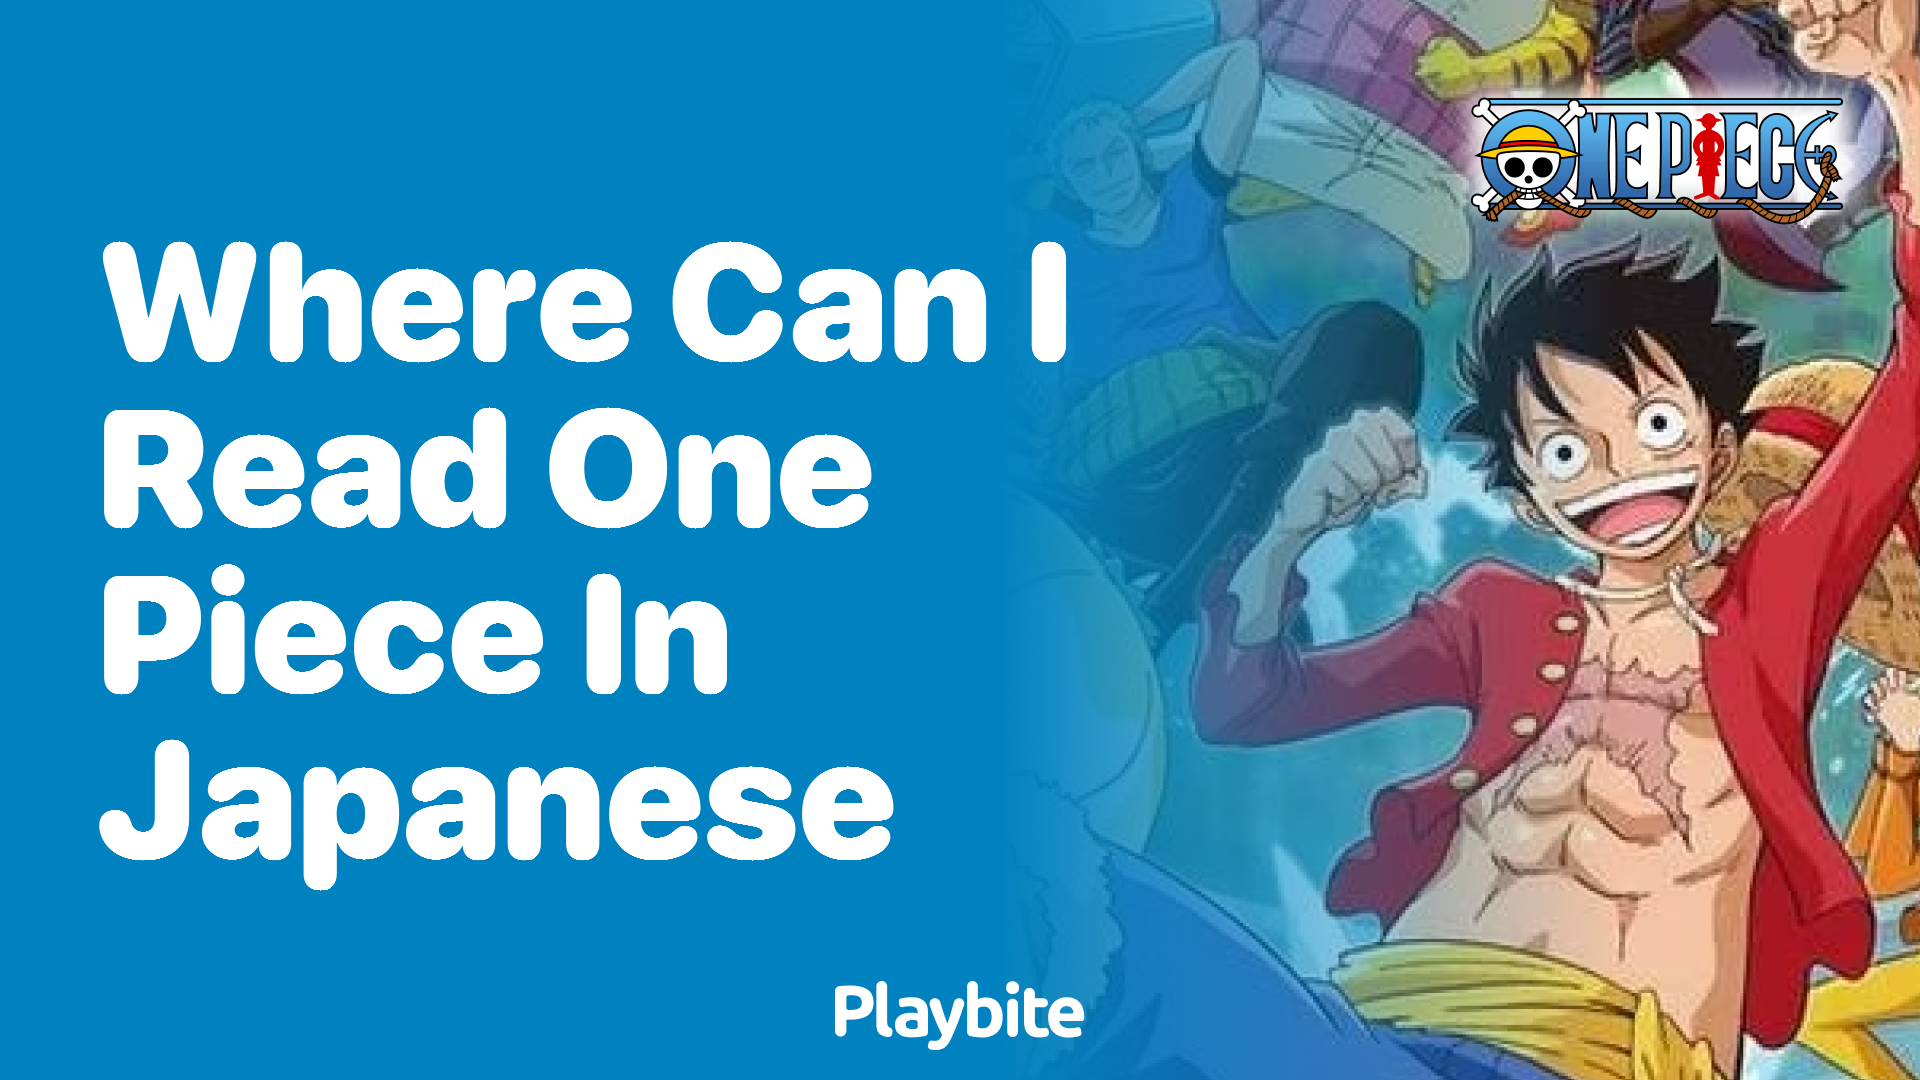 Where Can I Read One Piece in Japanese?